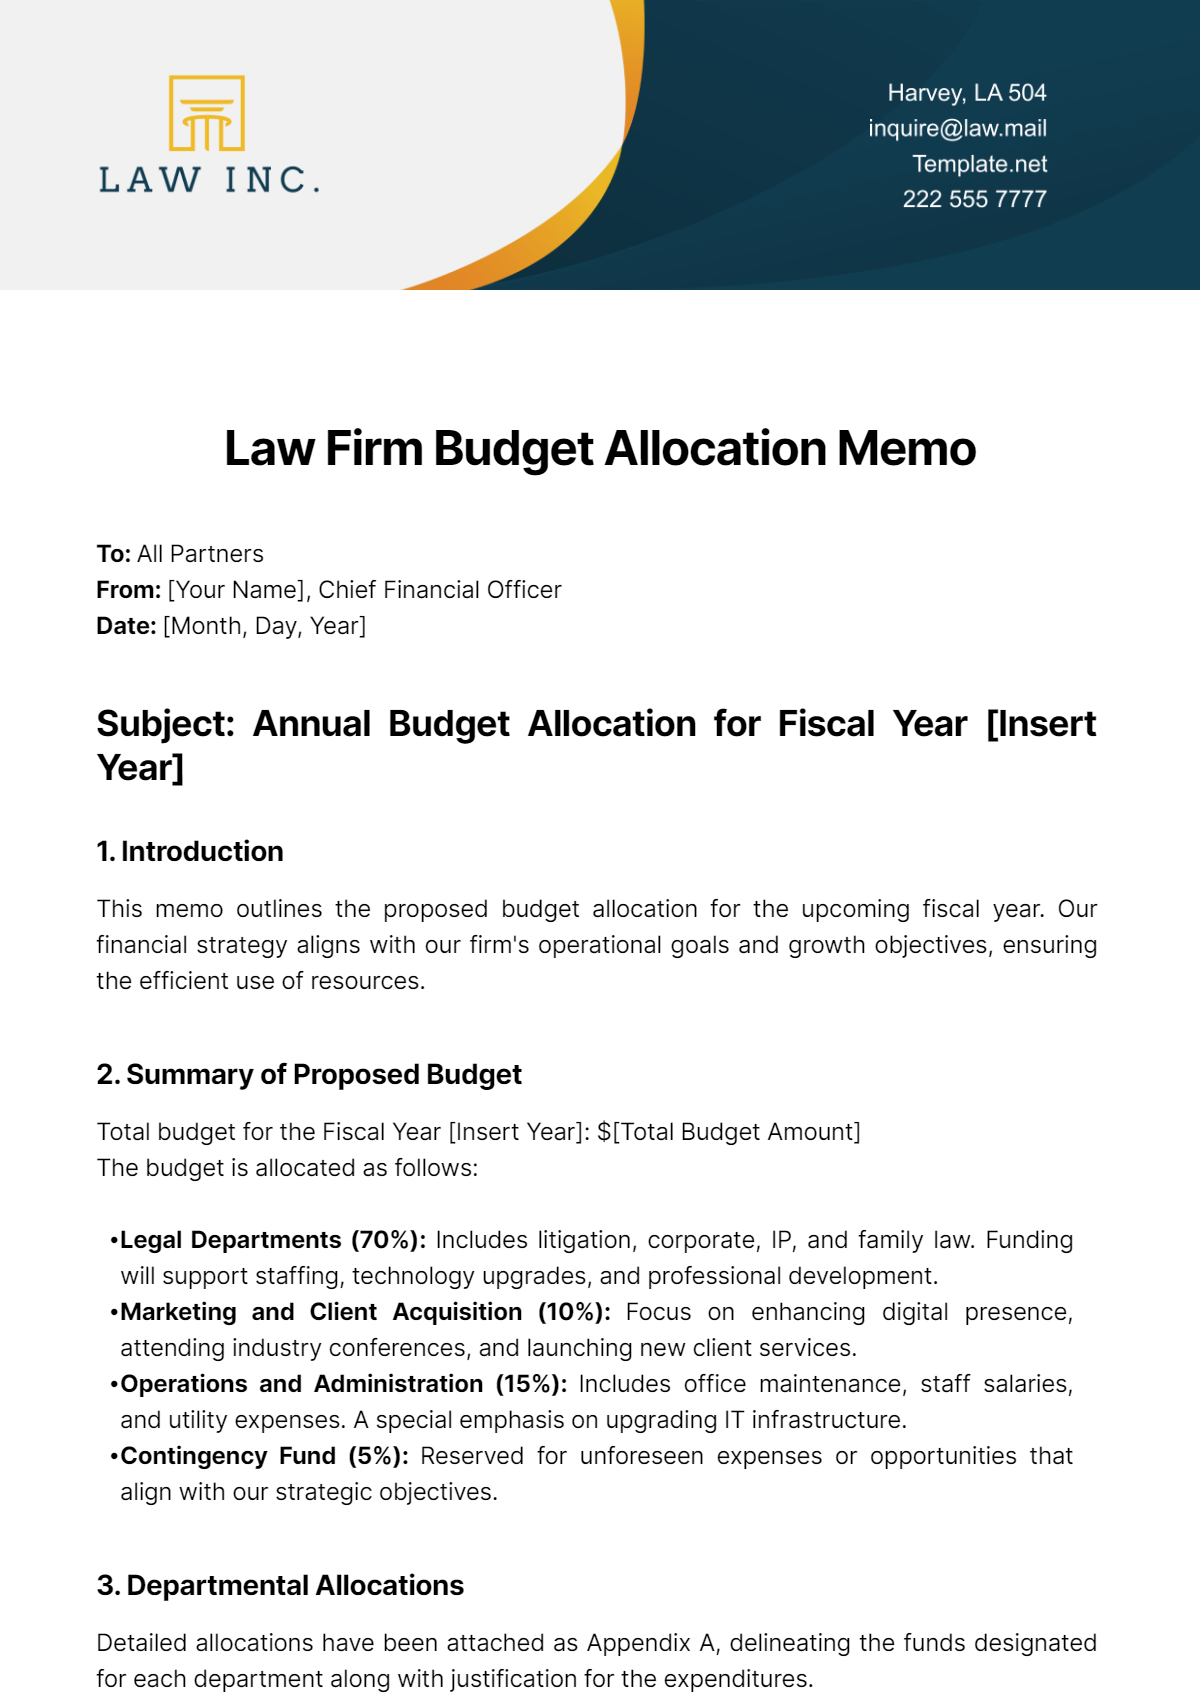 Law Firm Budget Allocation Memo Template